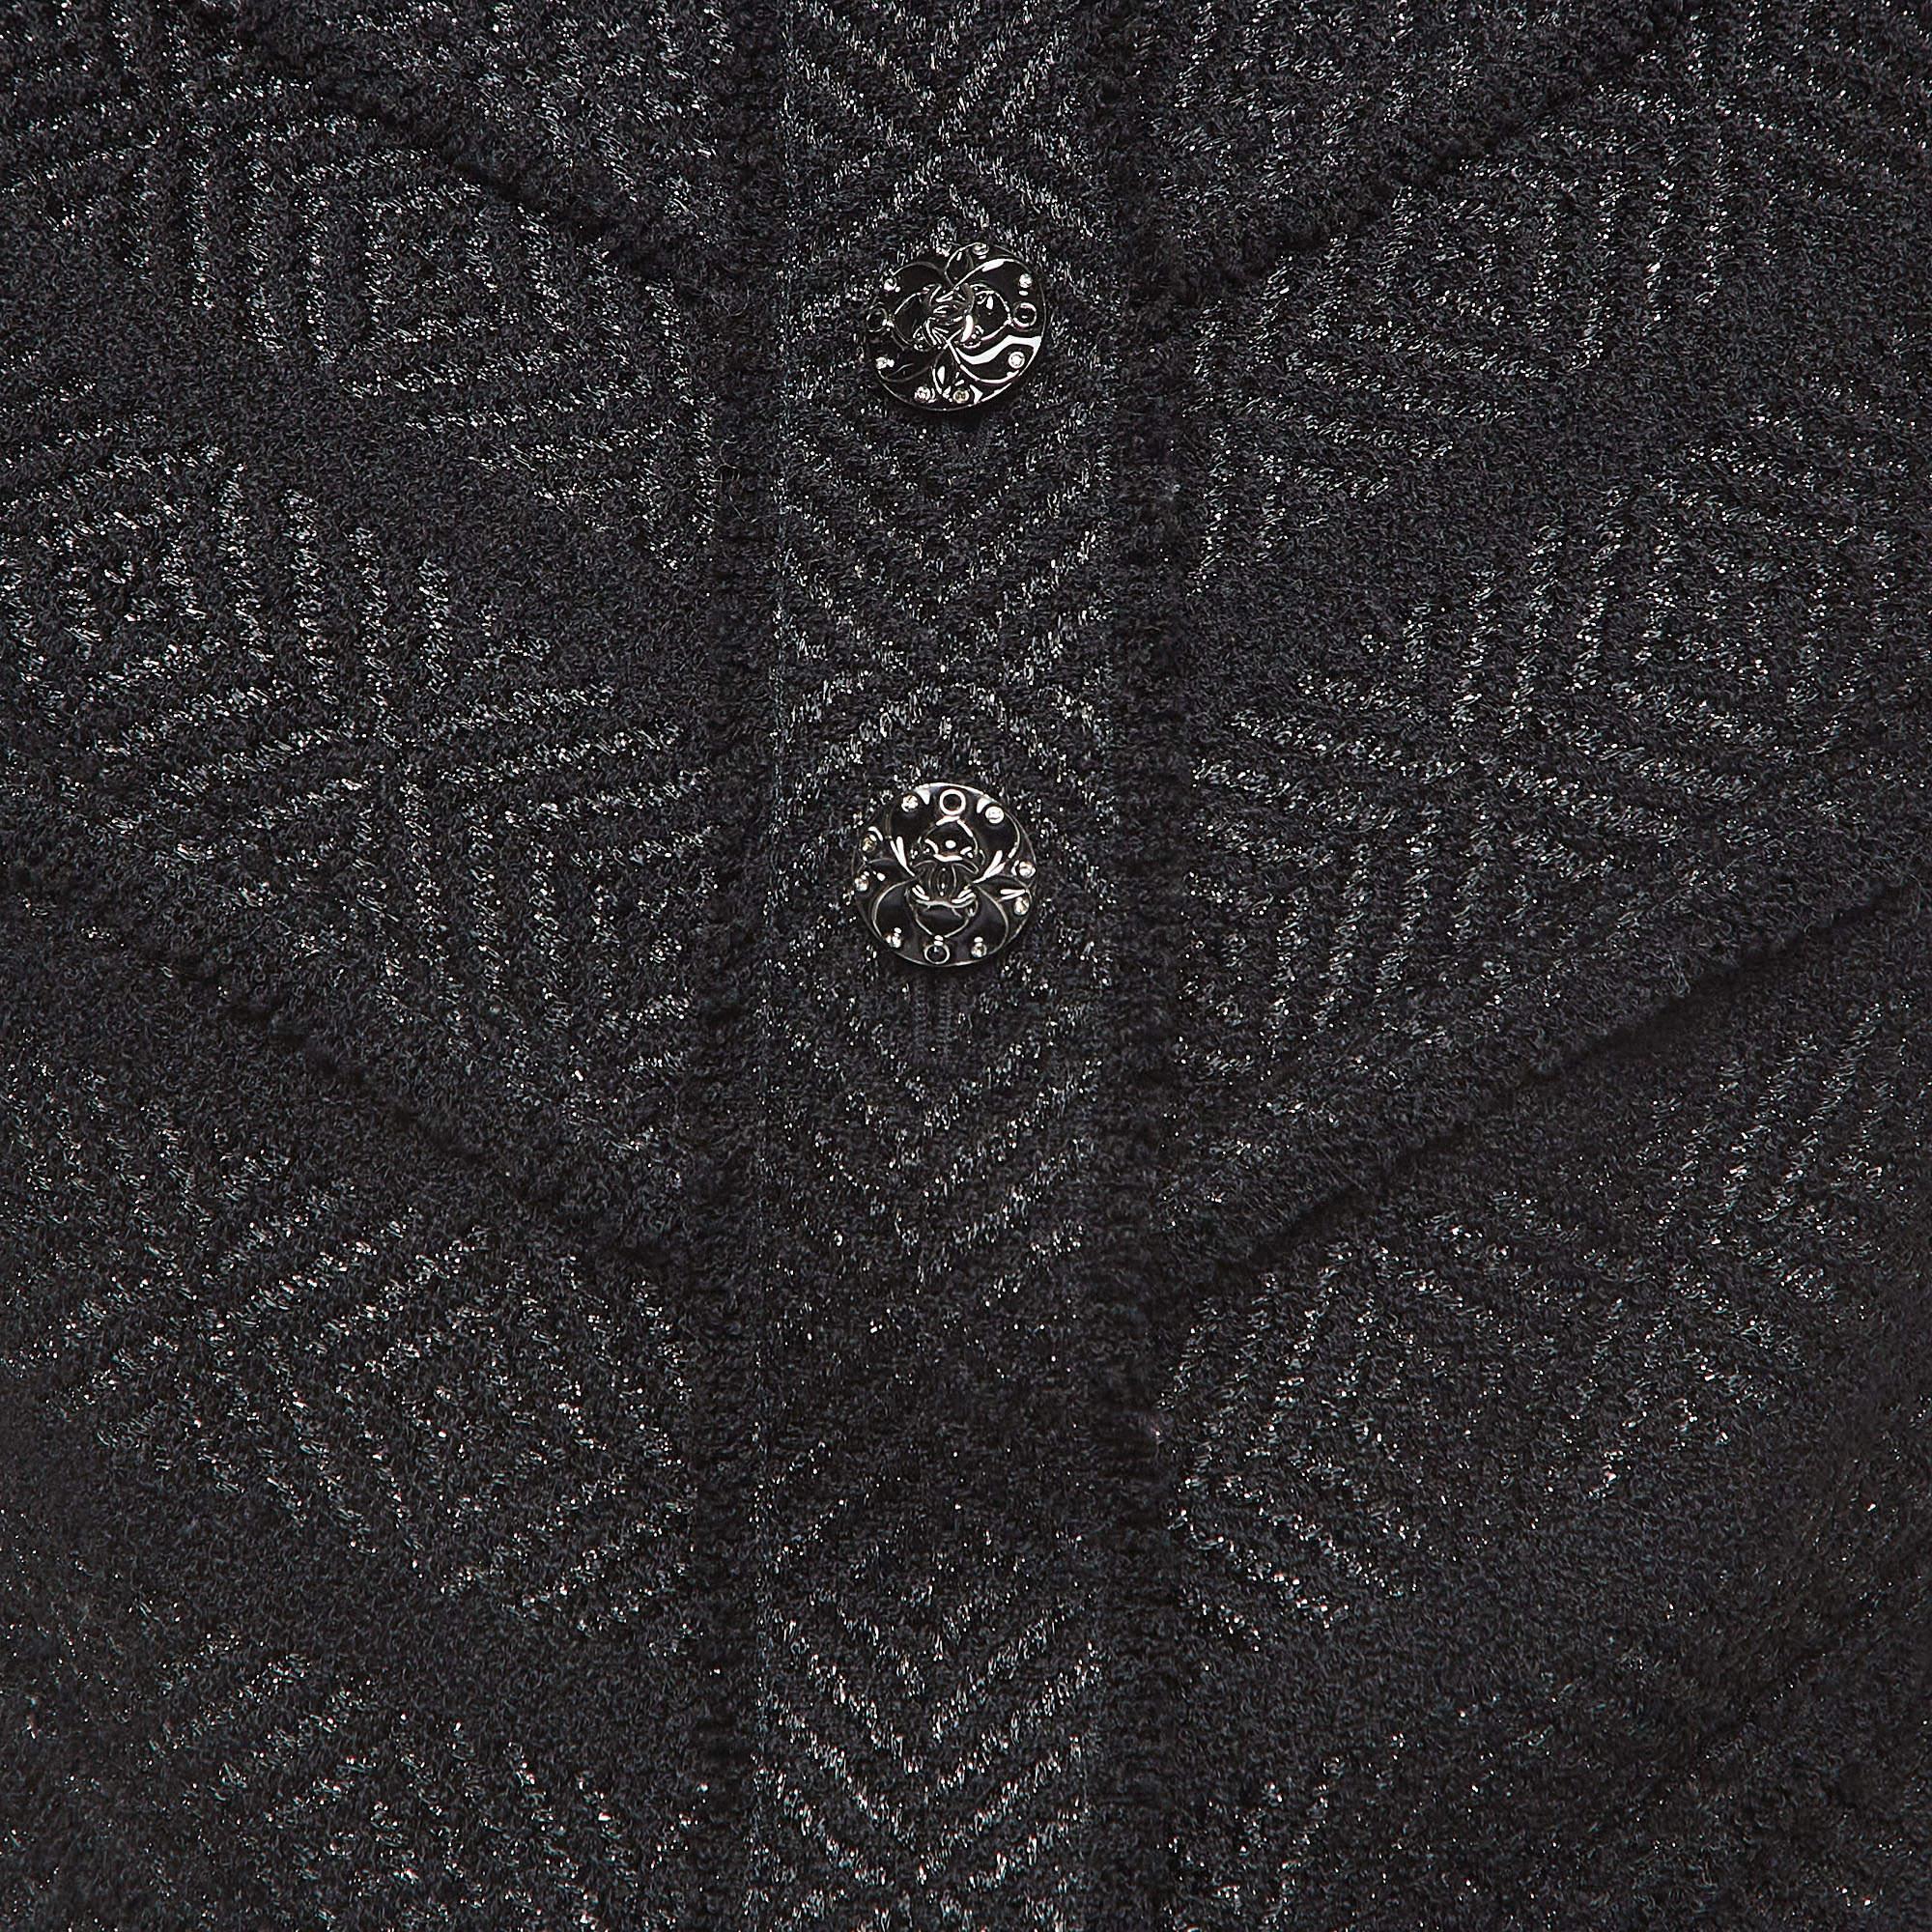 Chanel Black Lurex Tweed Jewel Buttons Detail Belted Mini Dress M In Good Condition For Sale In Dubai, Al Qouz 2